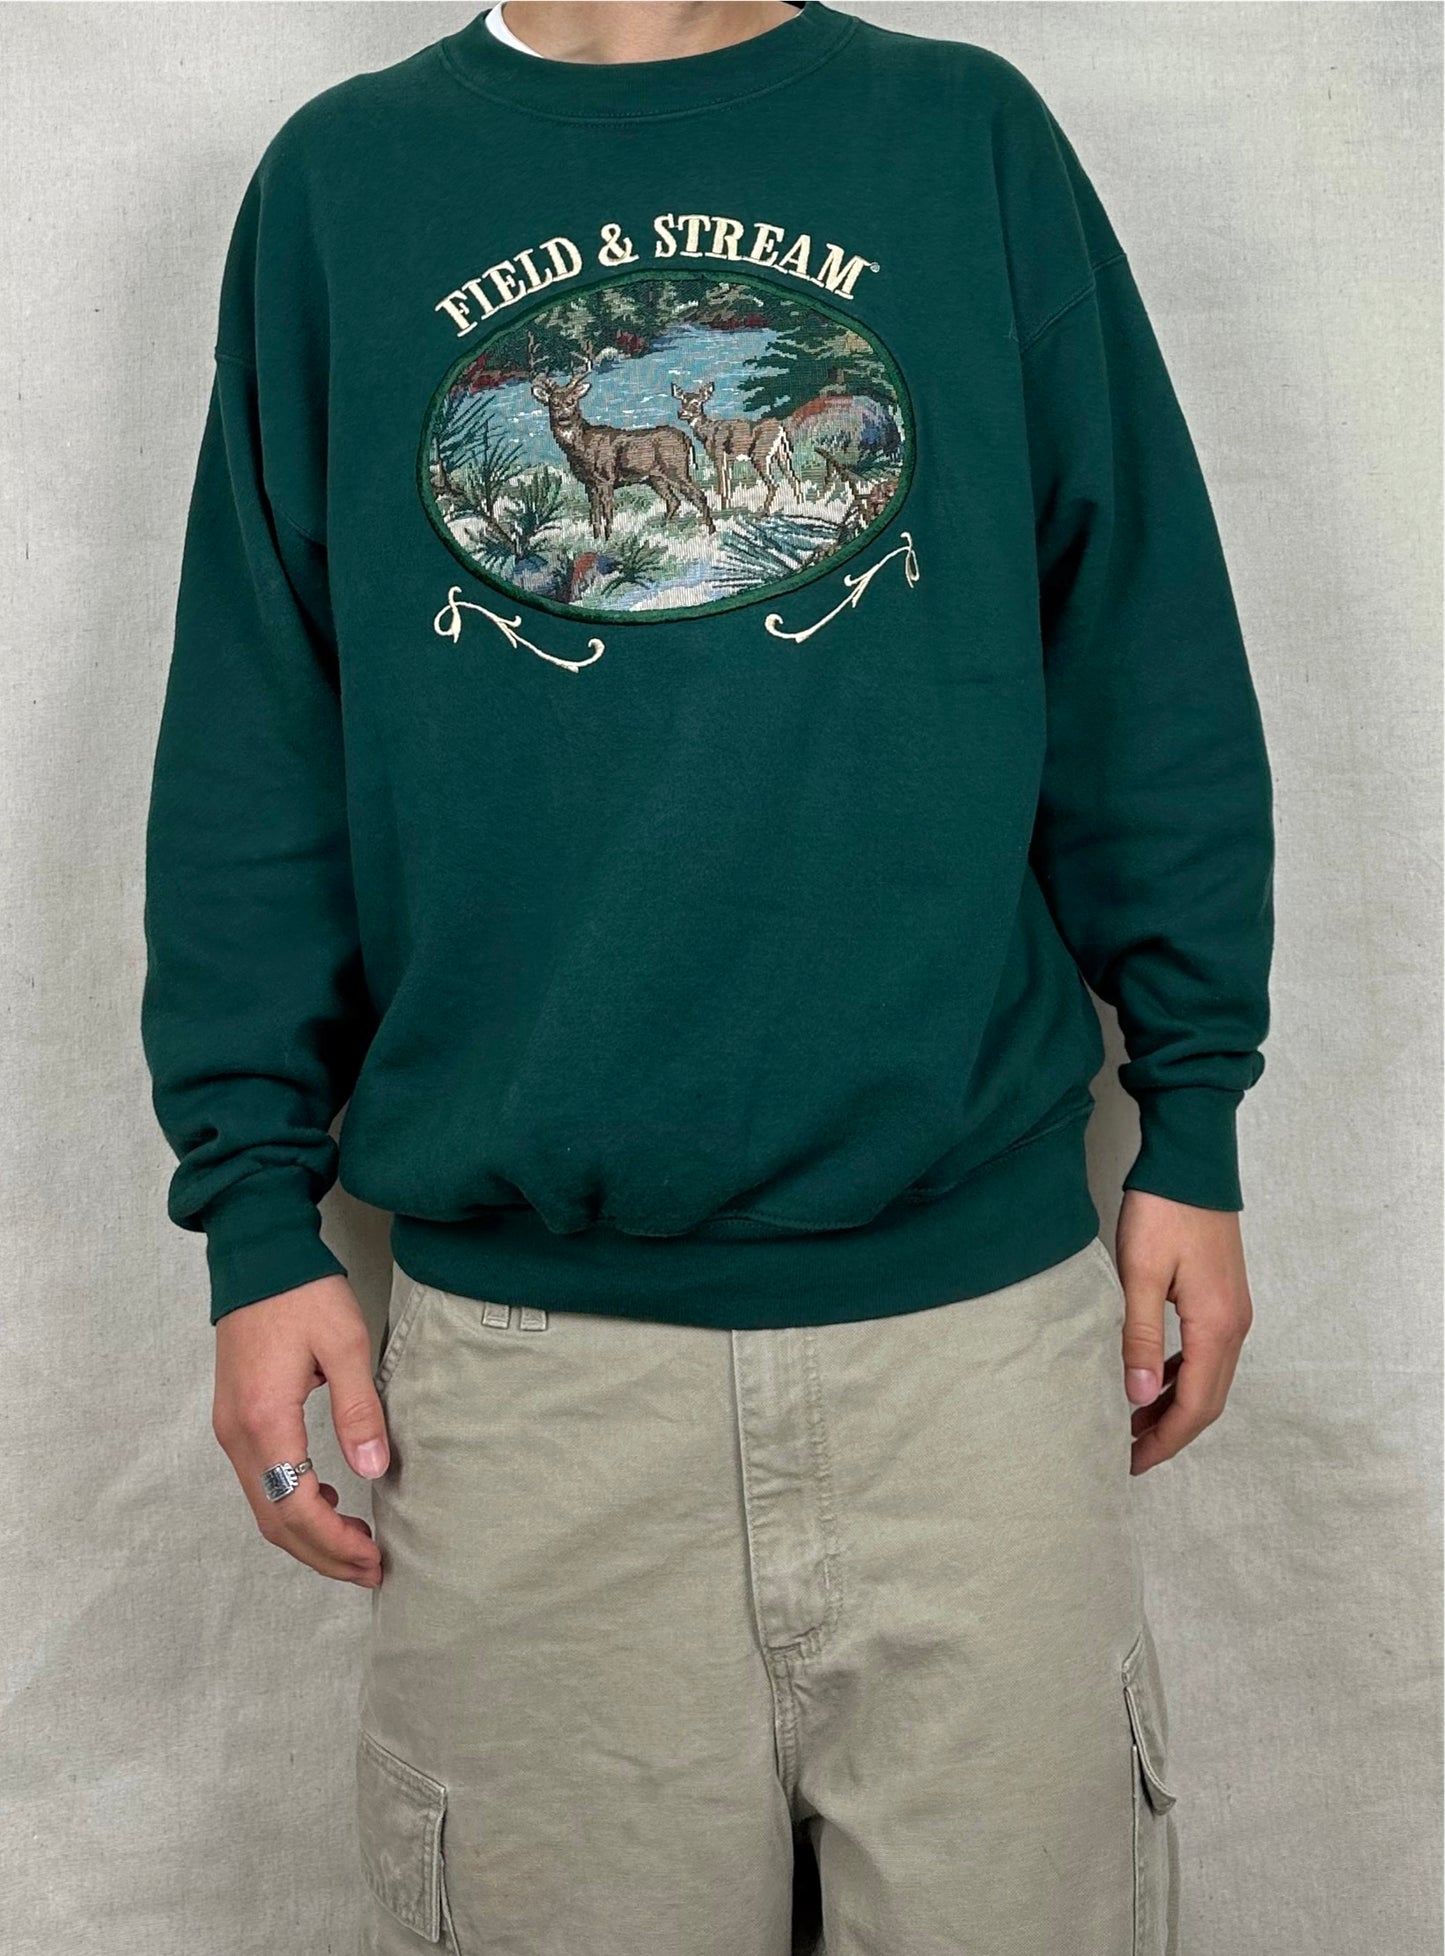 90's Field & Stream USA Made Embroidered Vintage Sweatshirt Size L